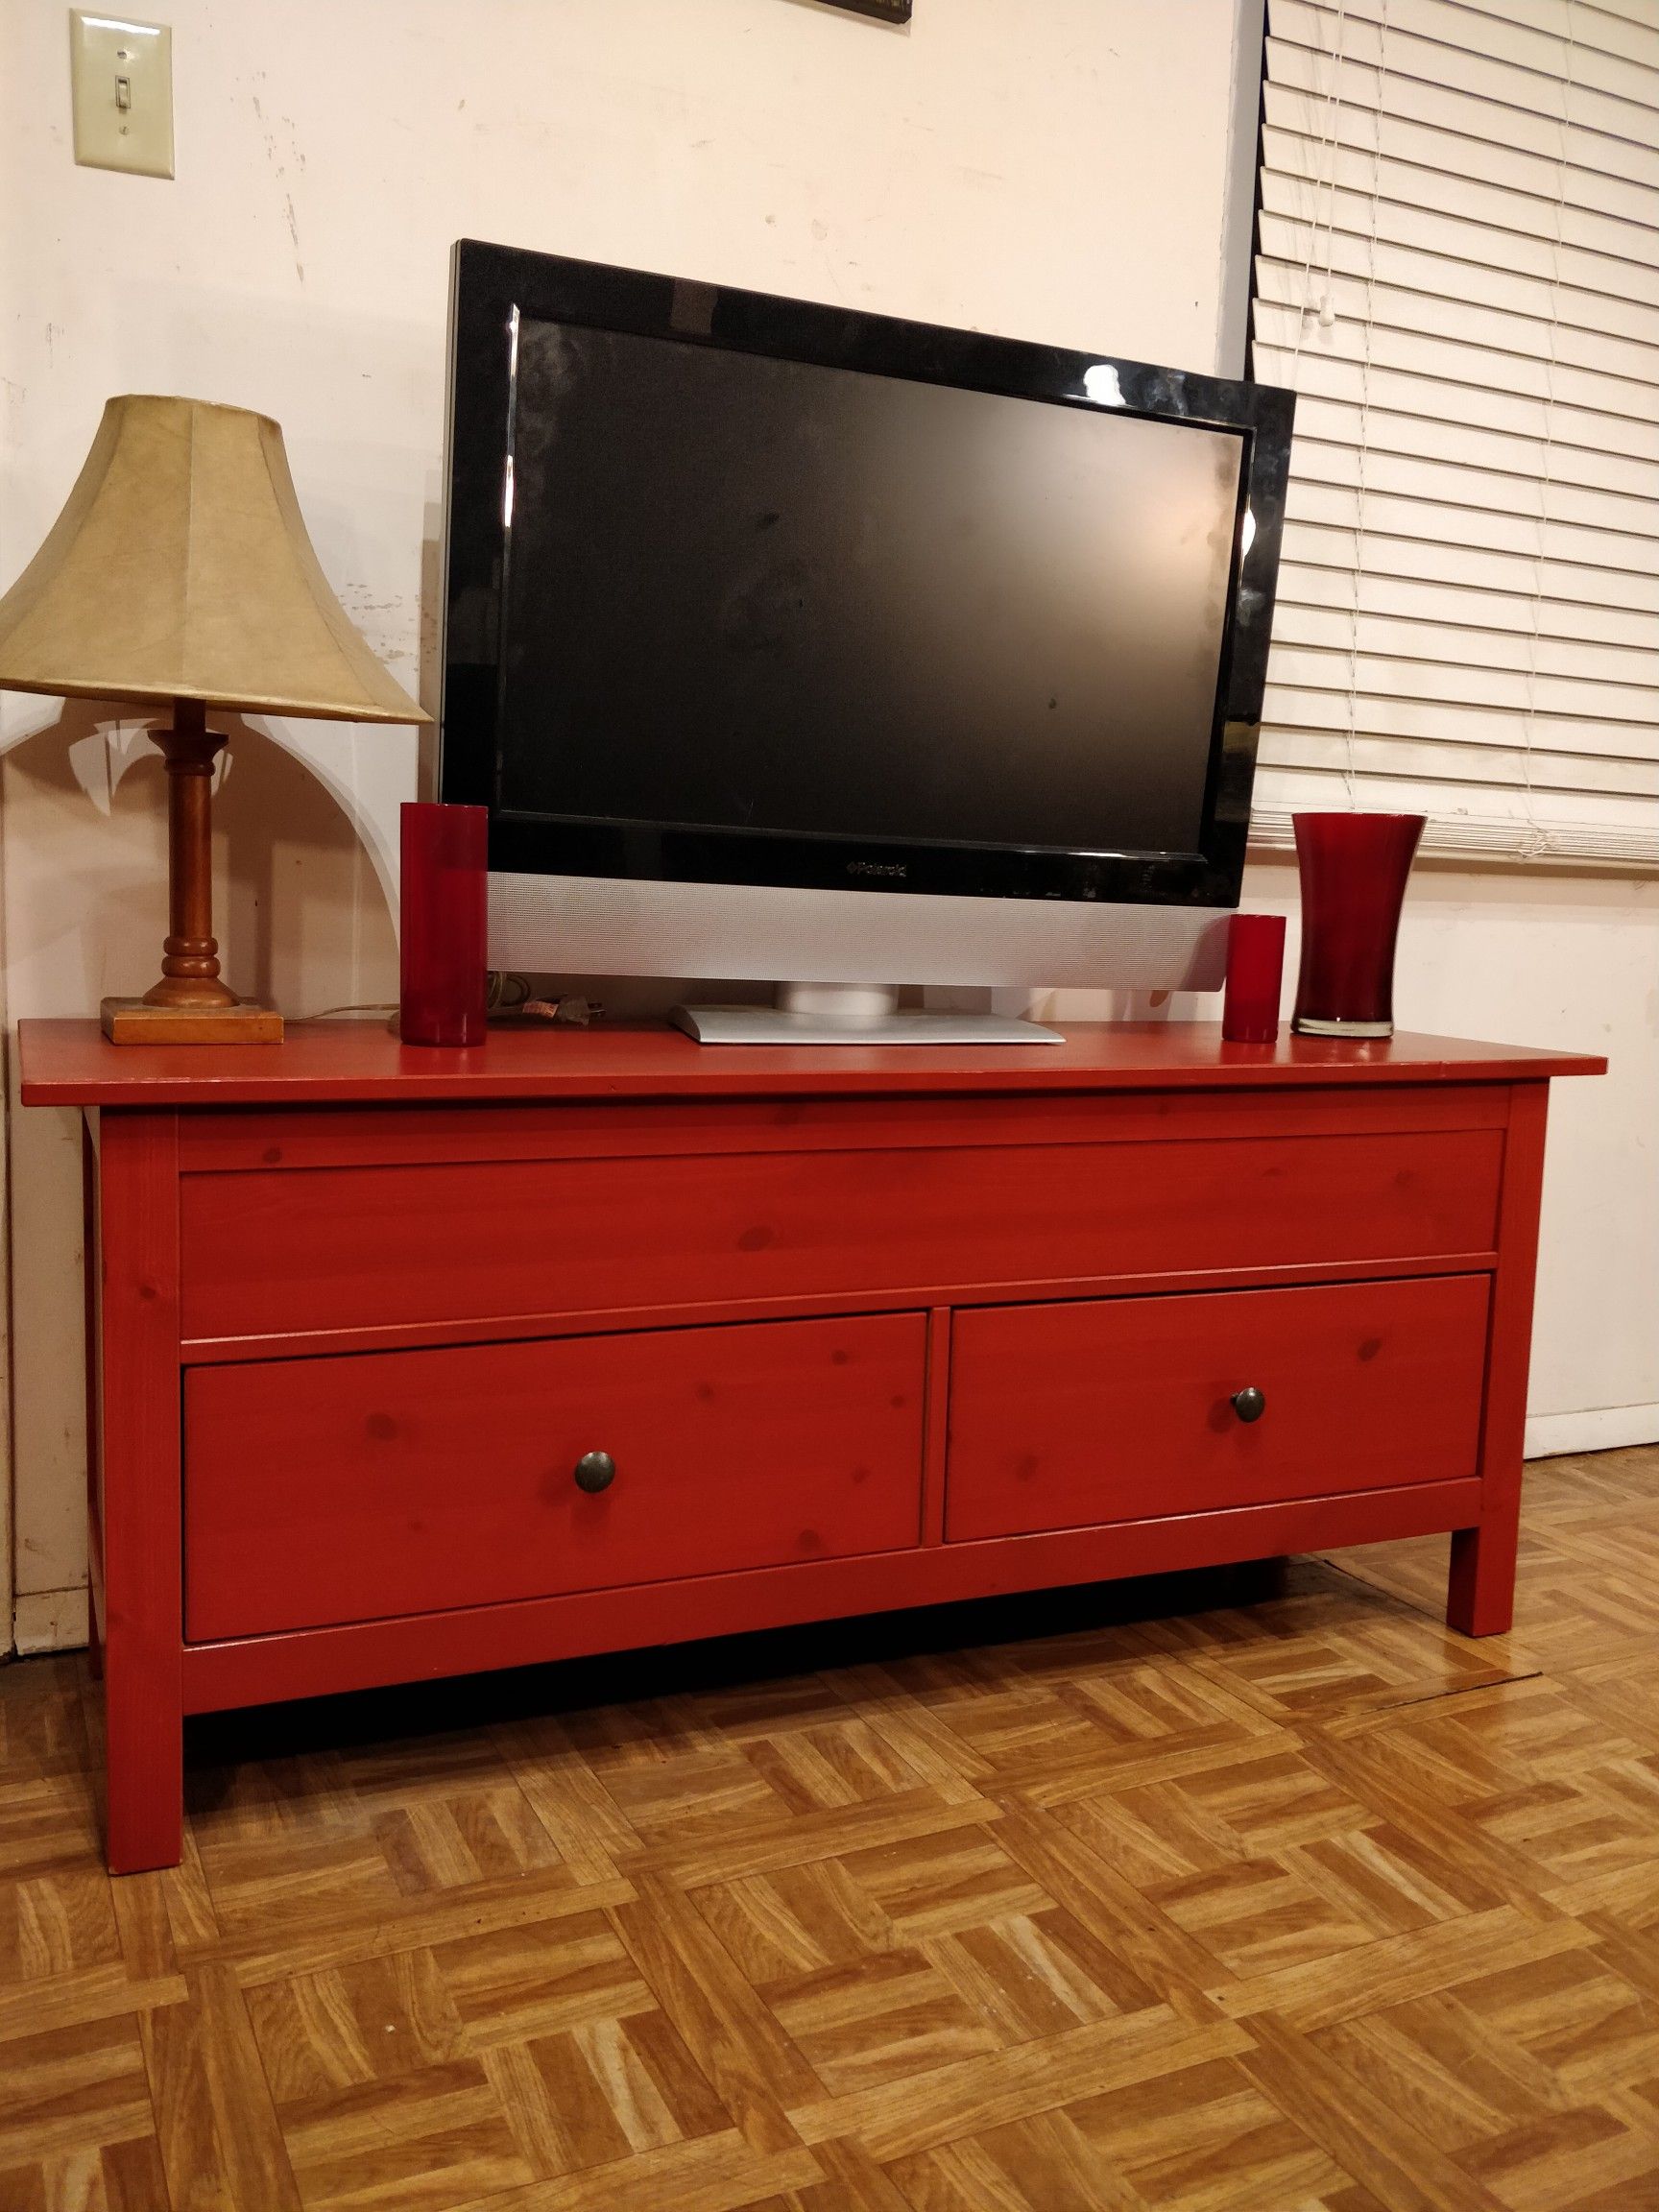 Solid wood TV stand/storage bench with 2 big drawers in great condition, all drawers sliding smoothly. L55"*W16"*H22.5"